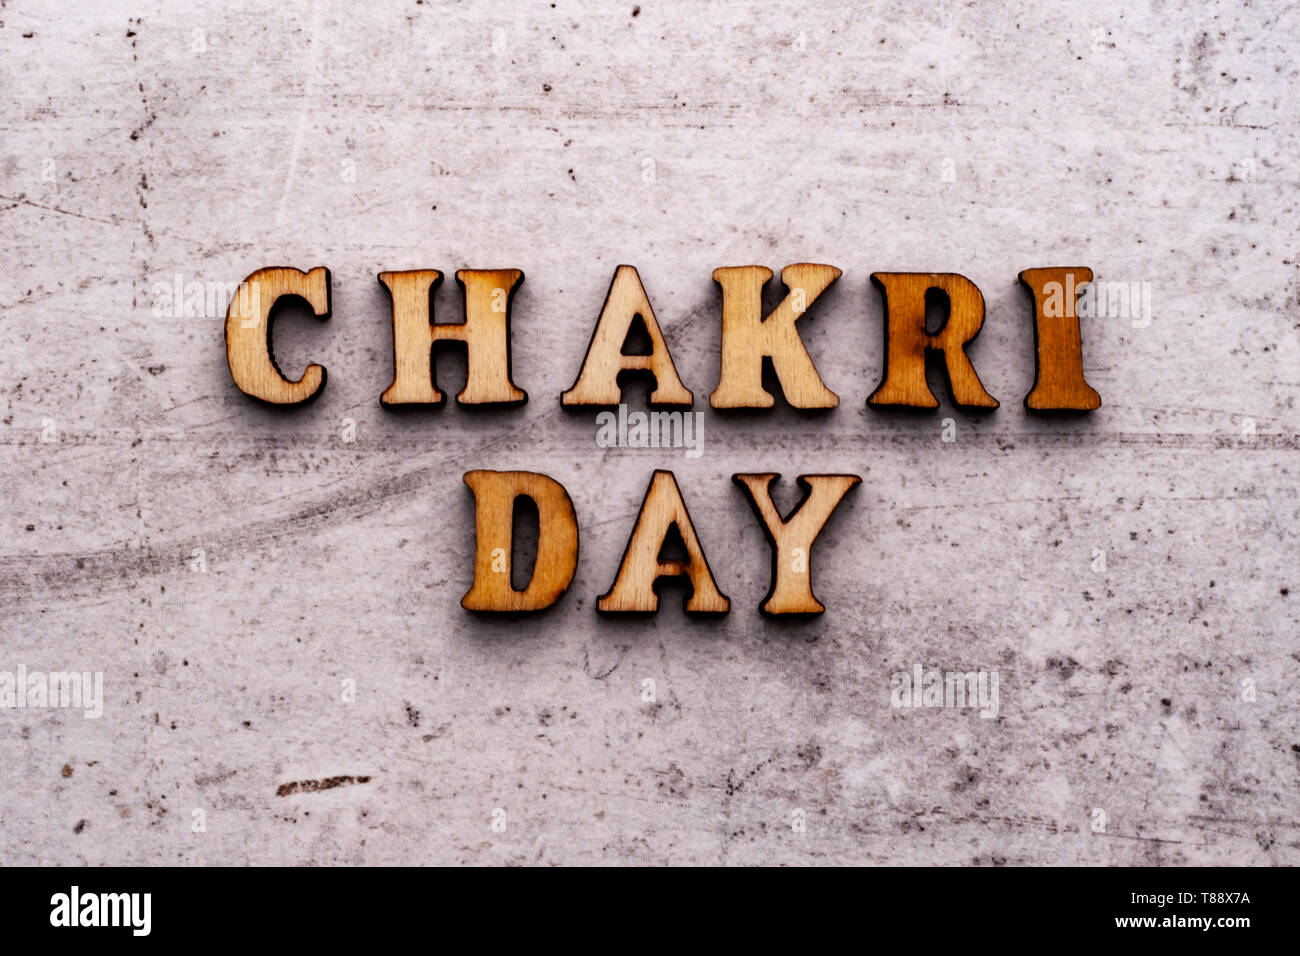 Inscription CHAKRI DAY in wooden letters on a light background. Stock Photo